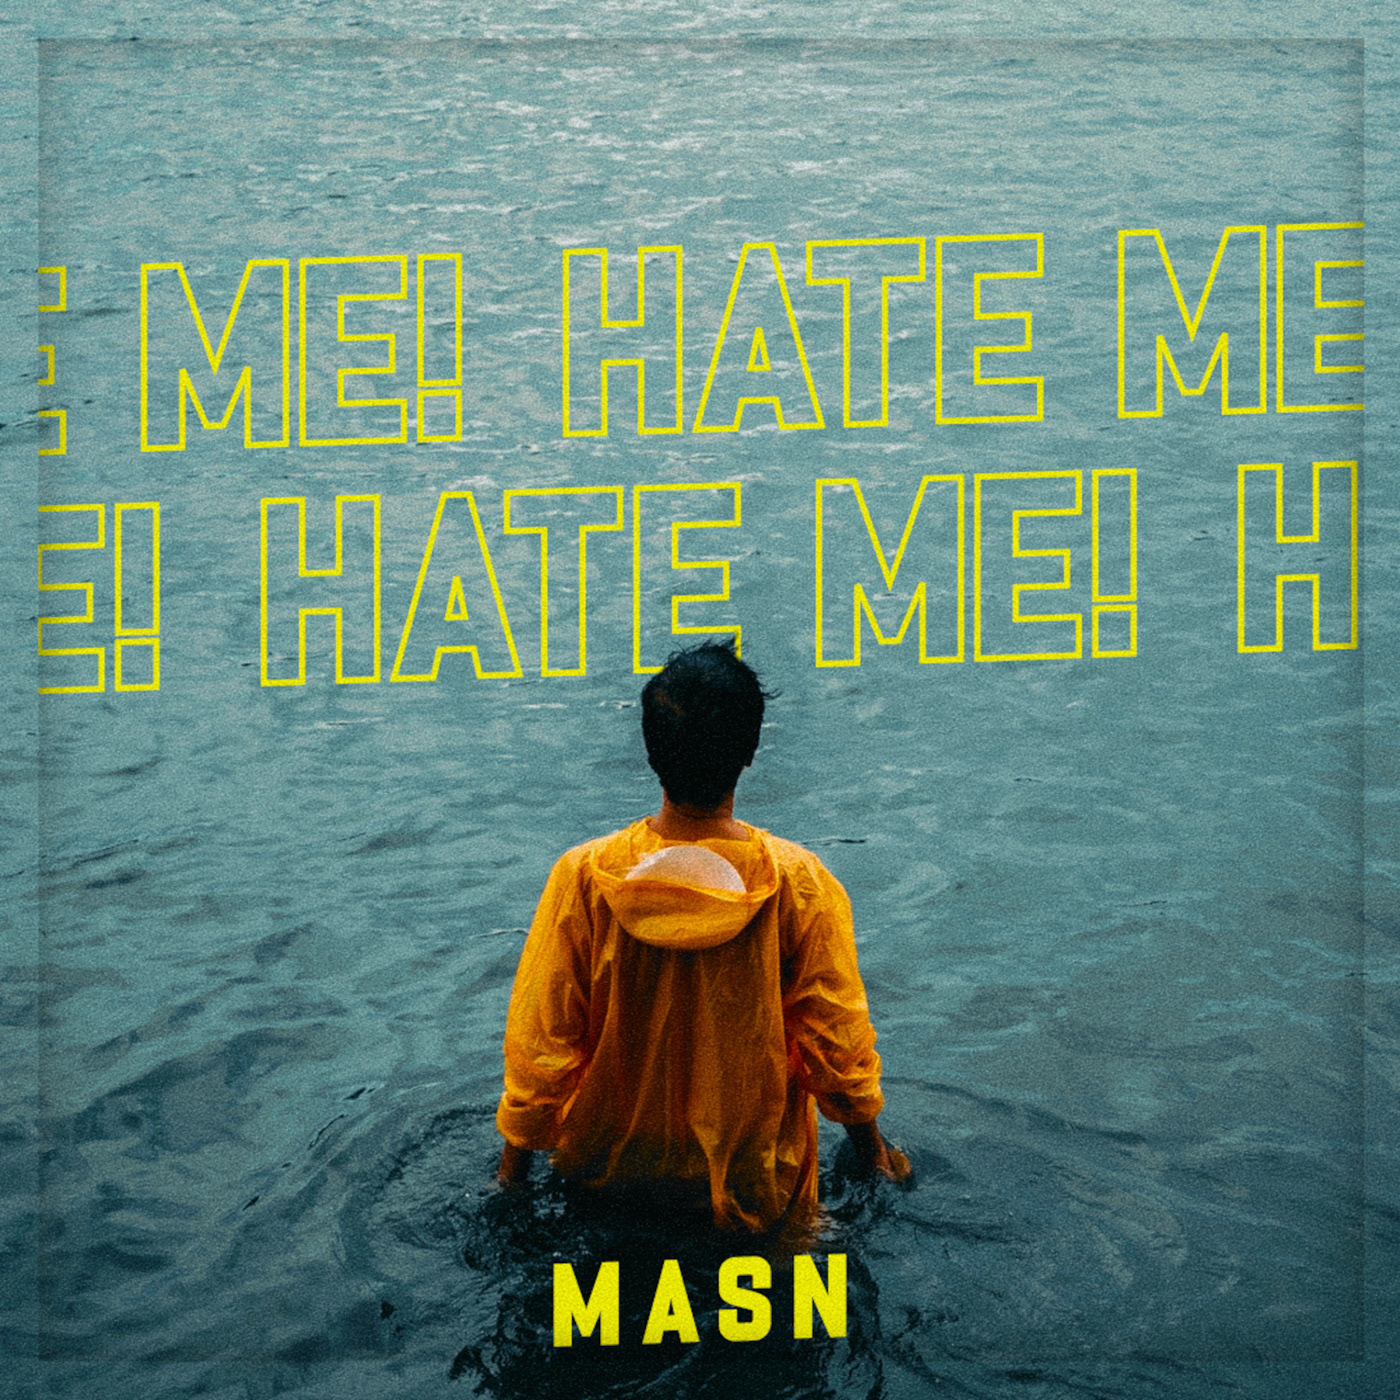 This is an alternative album cover design for the song "Hate Me!" by MASN.